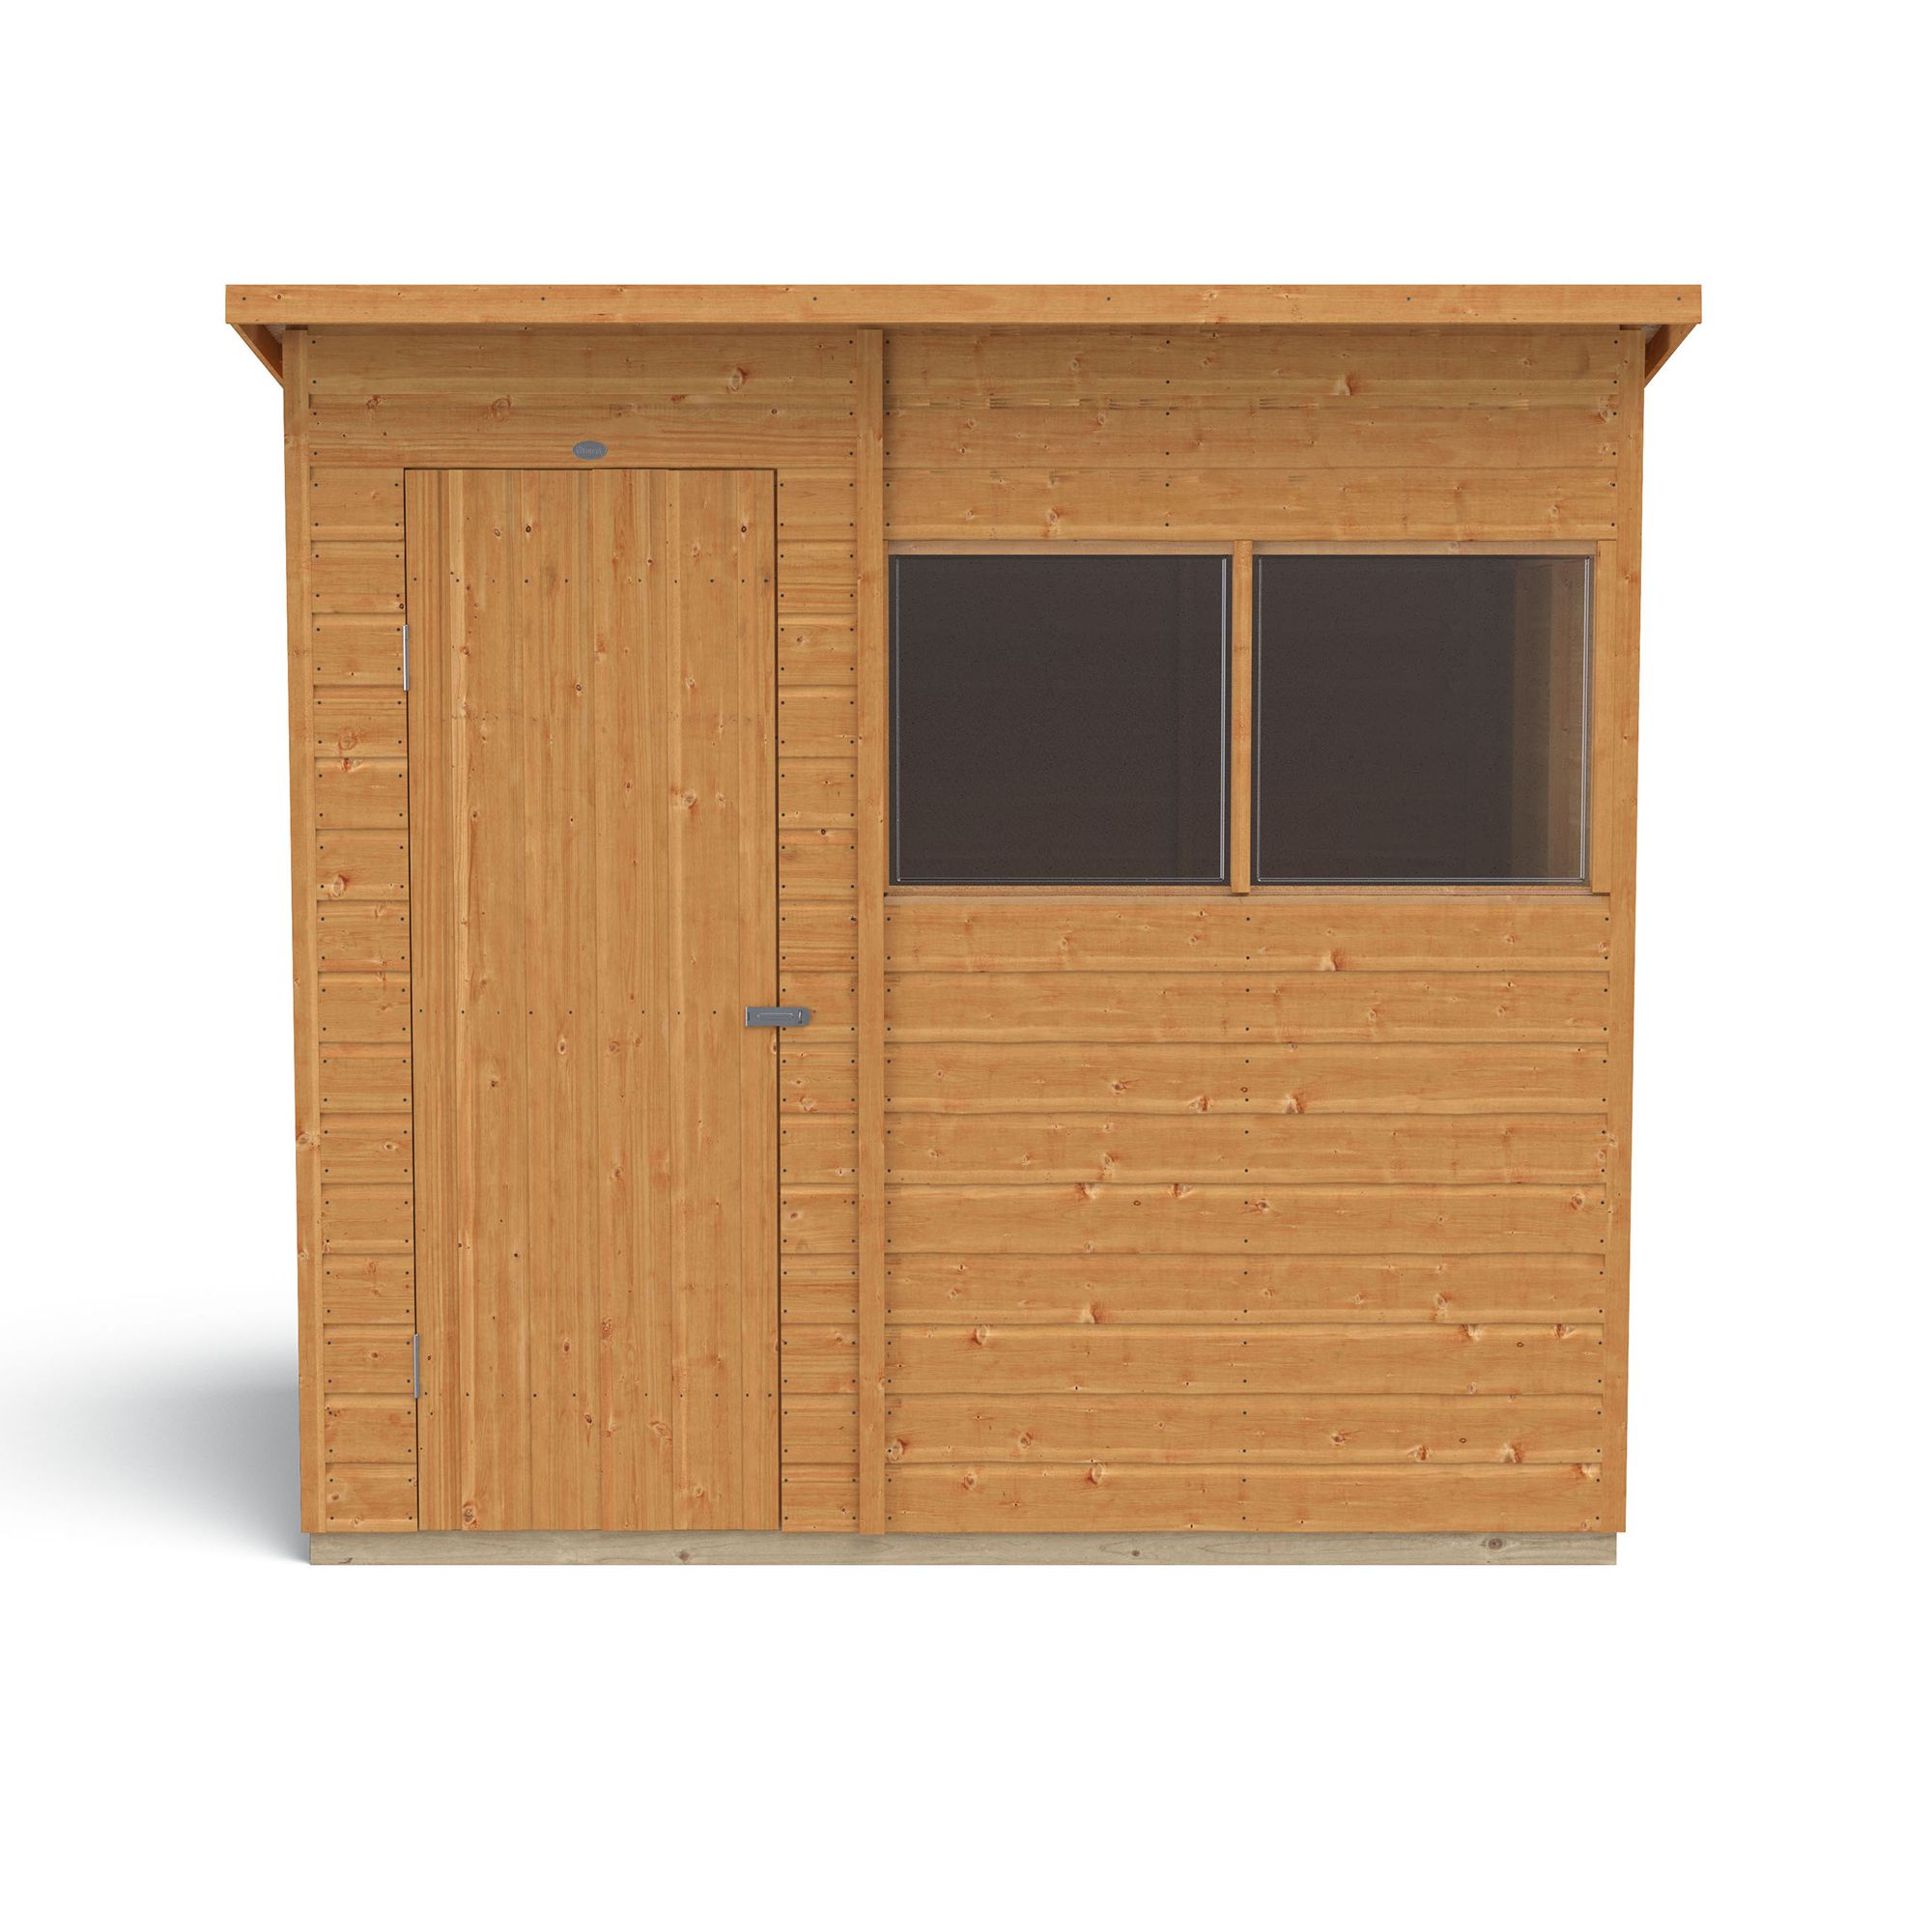 Forest Garden Shiplap 7x5 ft Pent Wooden Shed with floor & 2 windows - Assembly service included